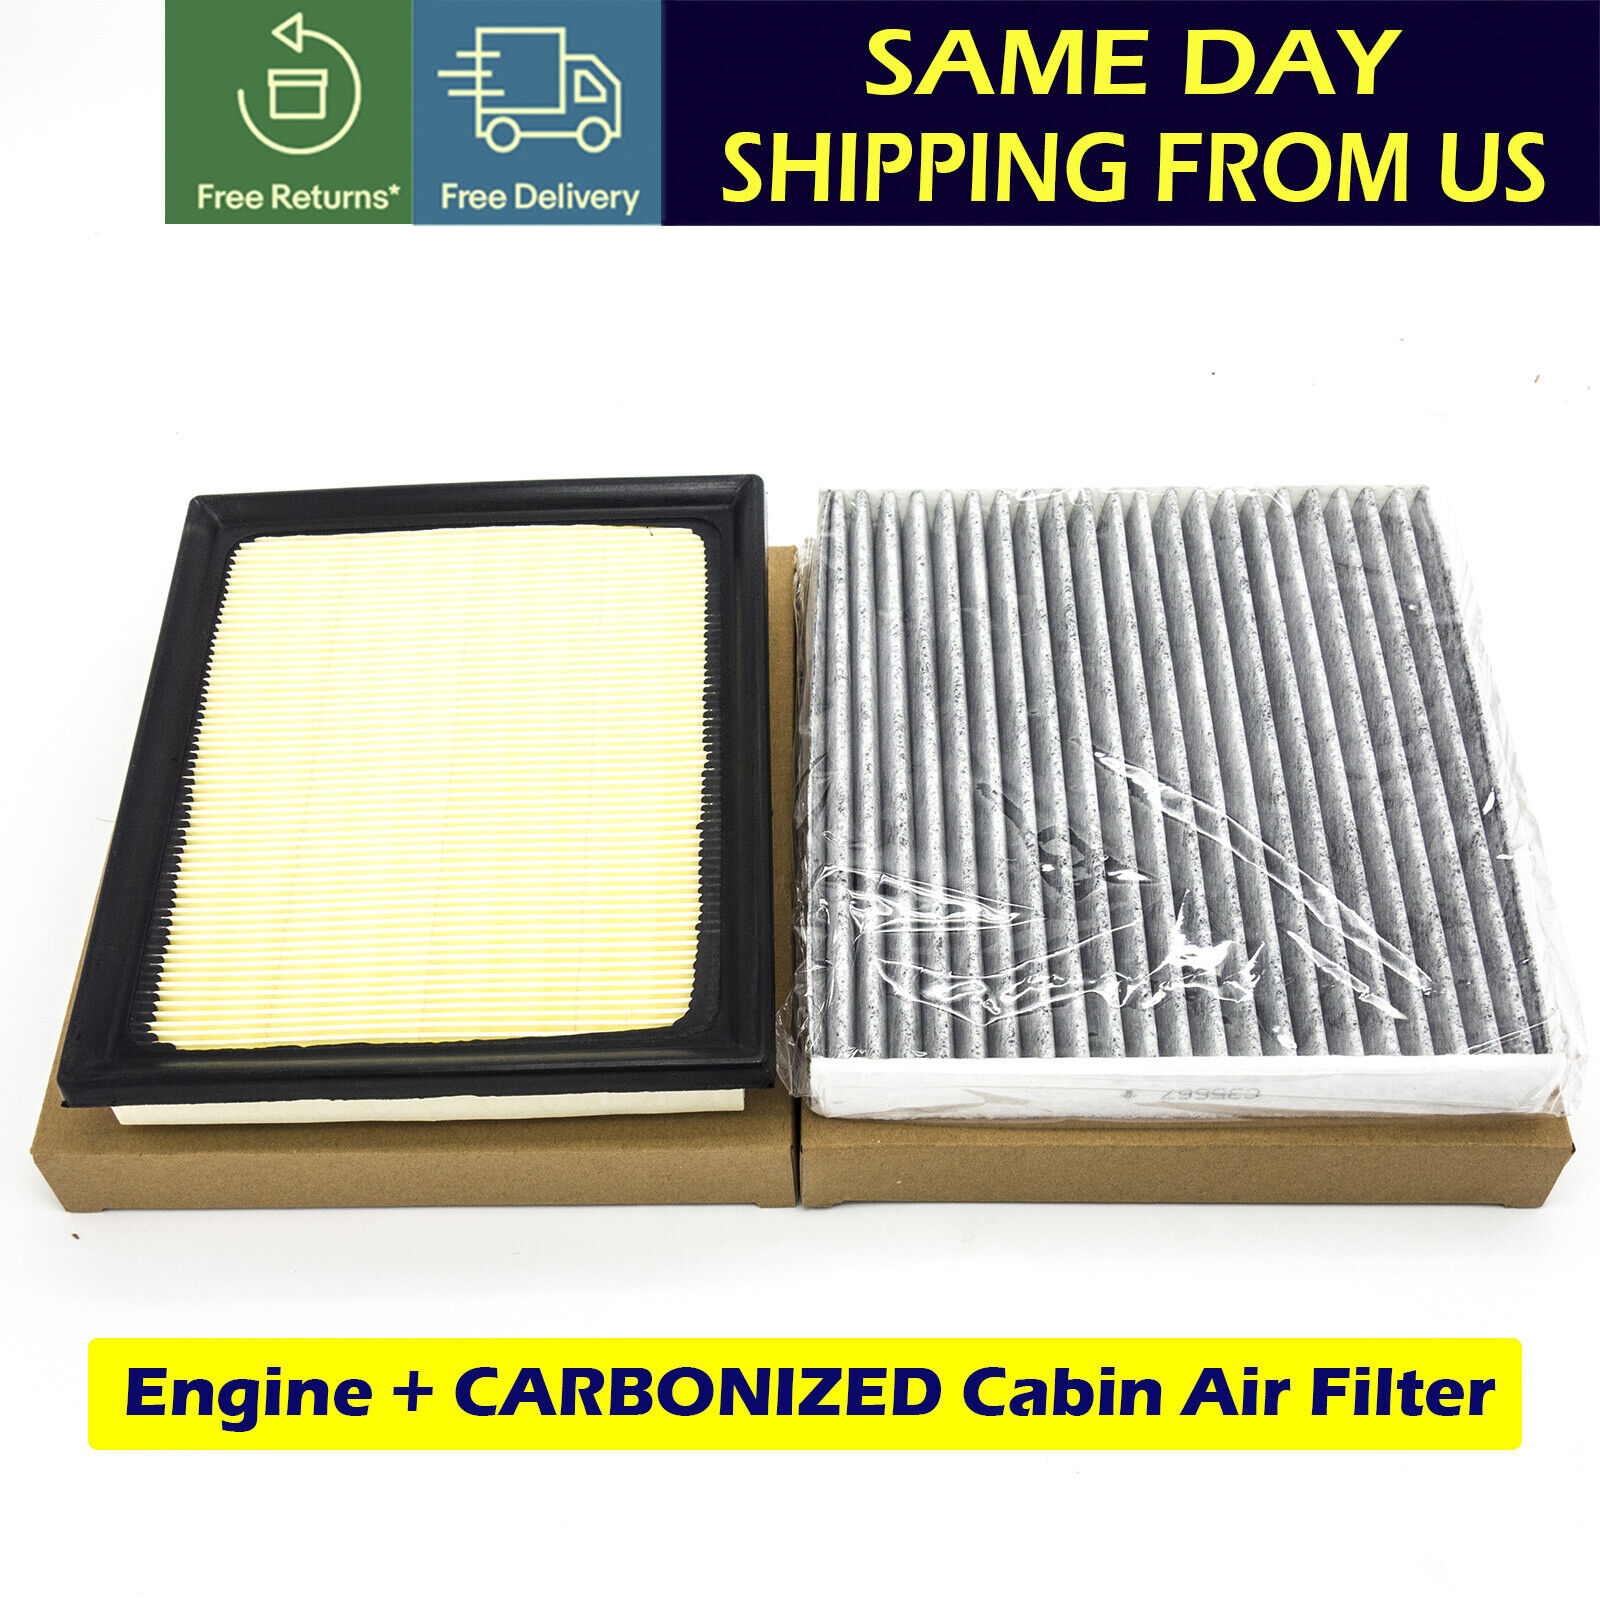 Engine & CARBONIZED Cabin Air Filter SET For PRIUS CT200H NX300h 17801-37020 US